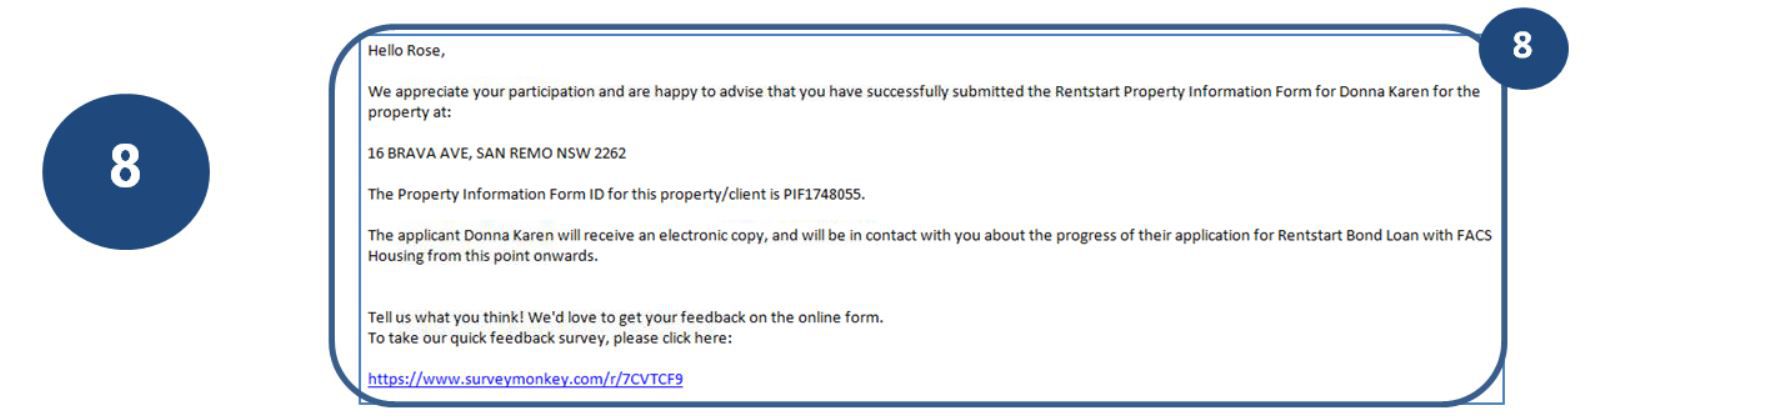 8. Once you click continue, you will receive a confirmation that you have submitted the Property Information Form back to the client